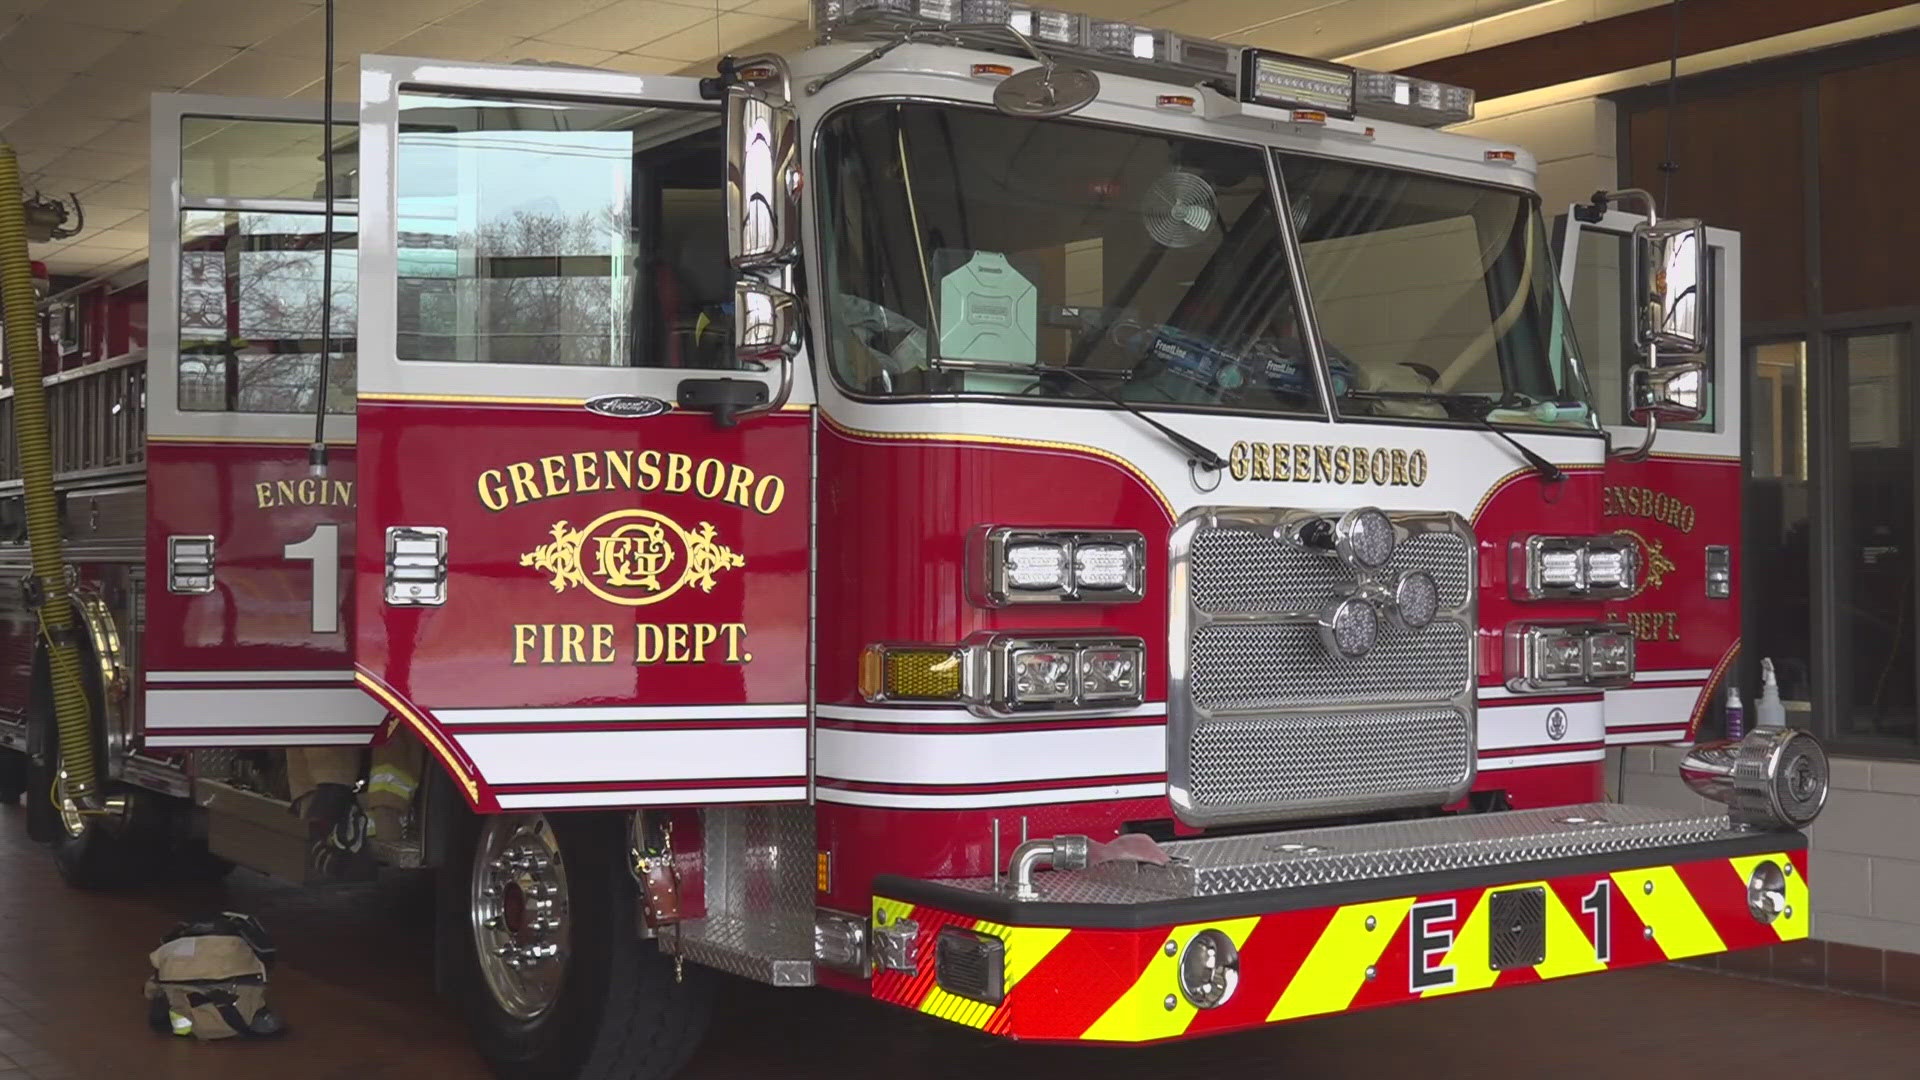 Some Winston-Salem firefighters are working 72-hour shifts due to vacancies.